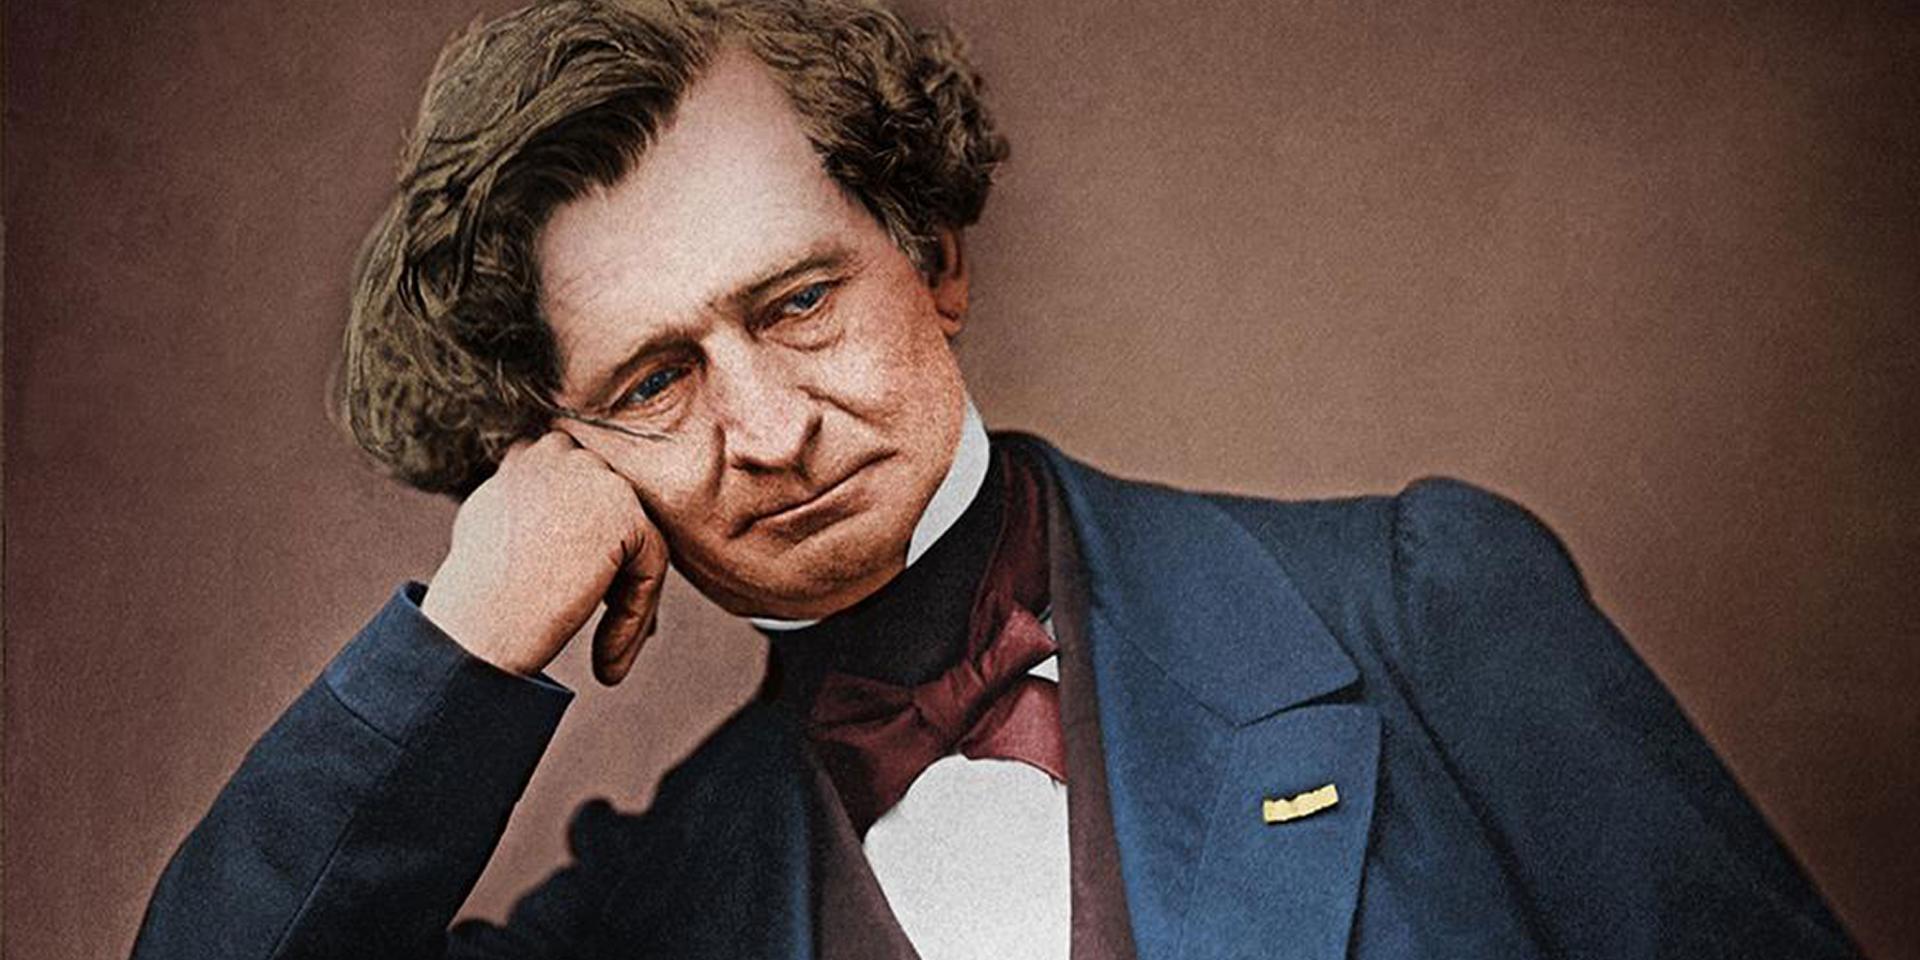 Hector Berlioz, picture of the 1863 by Pierre Petit